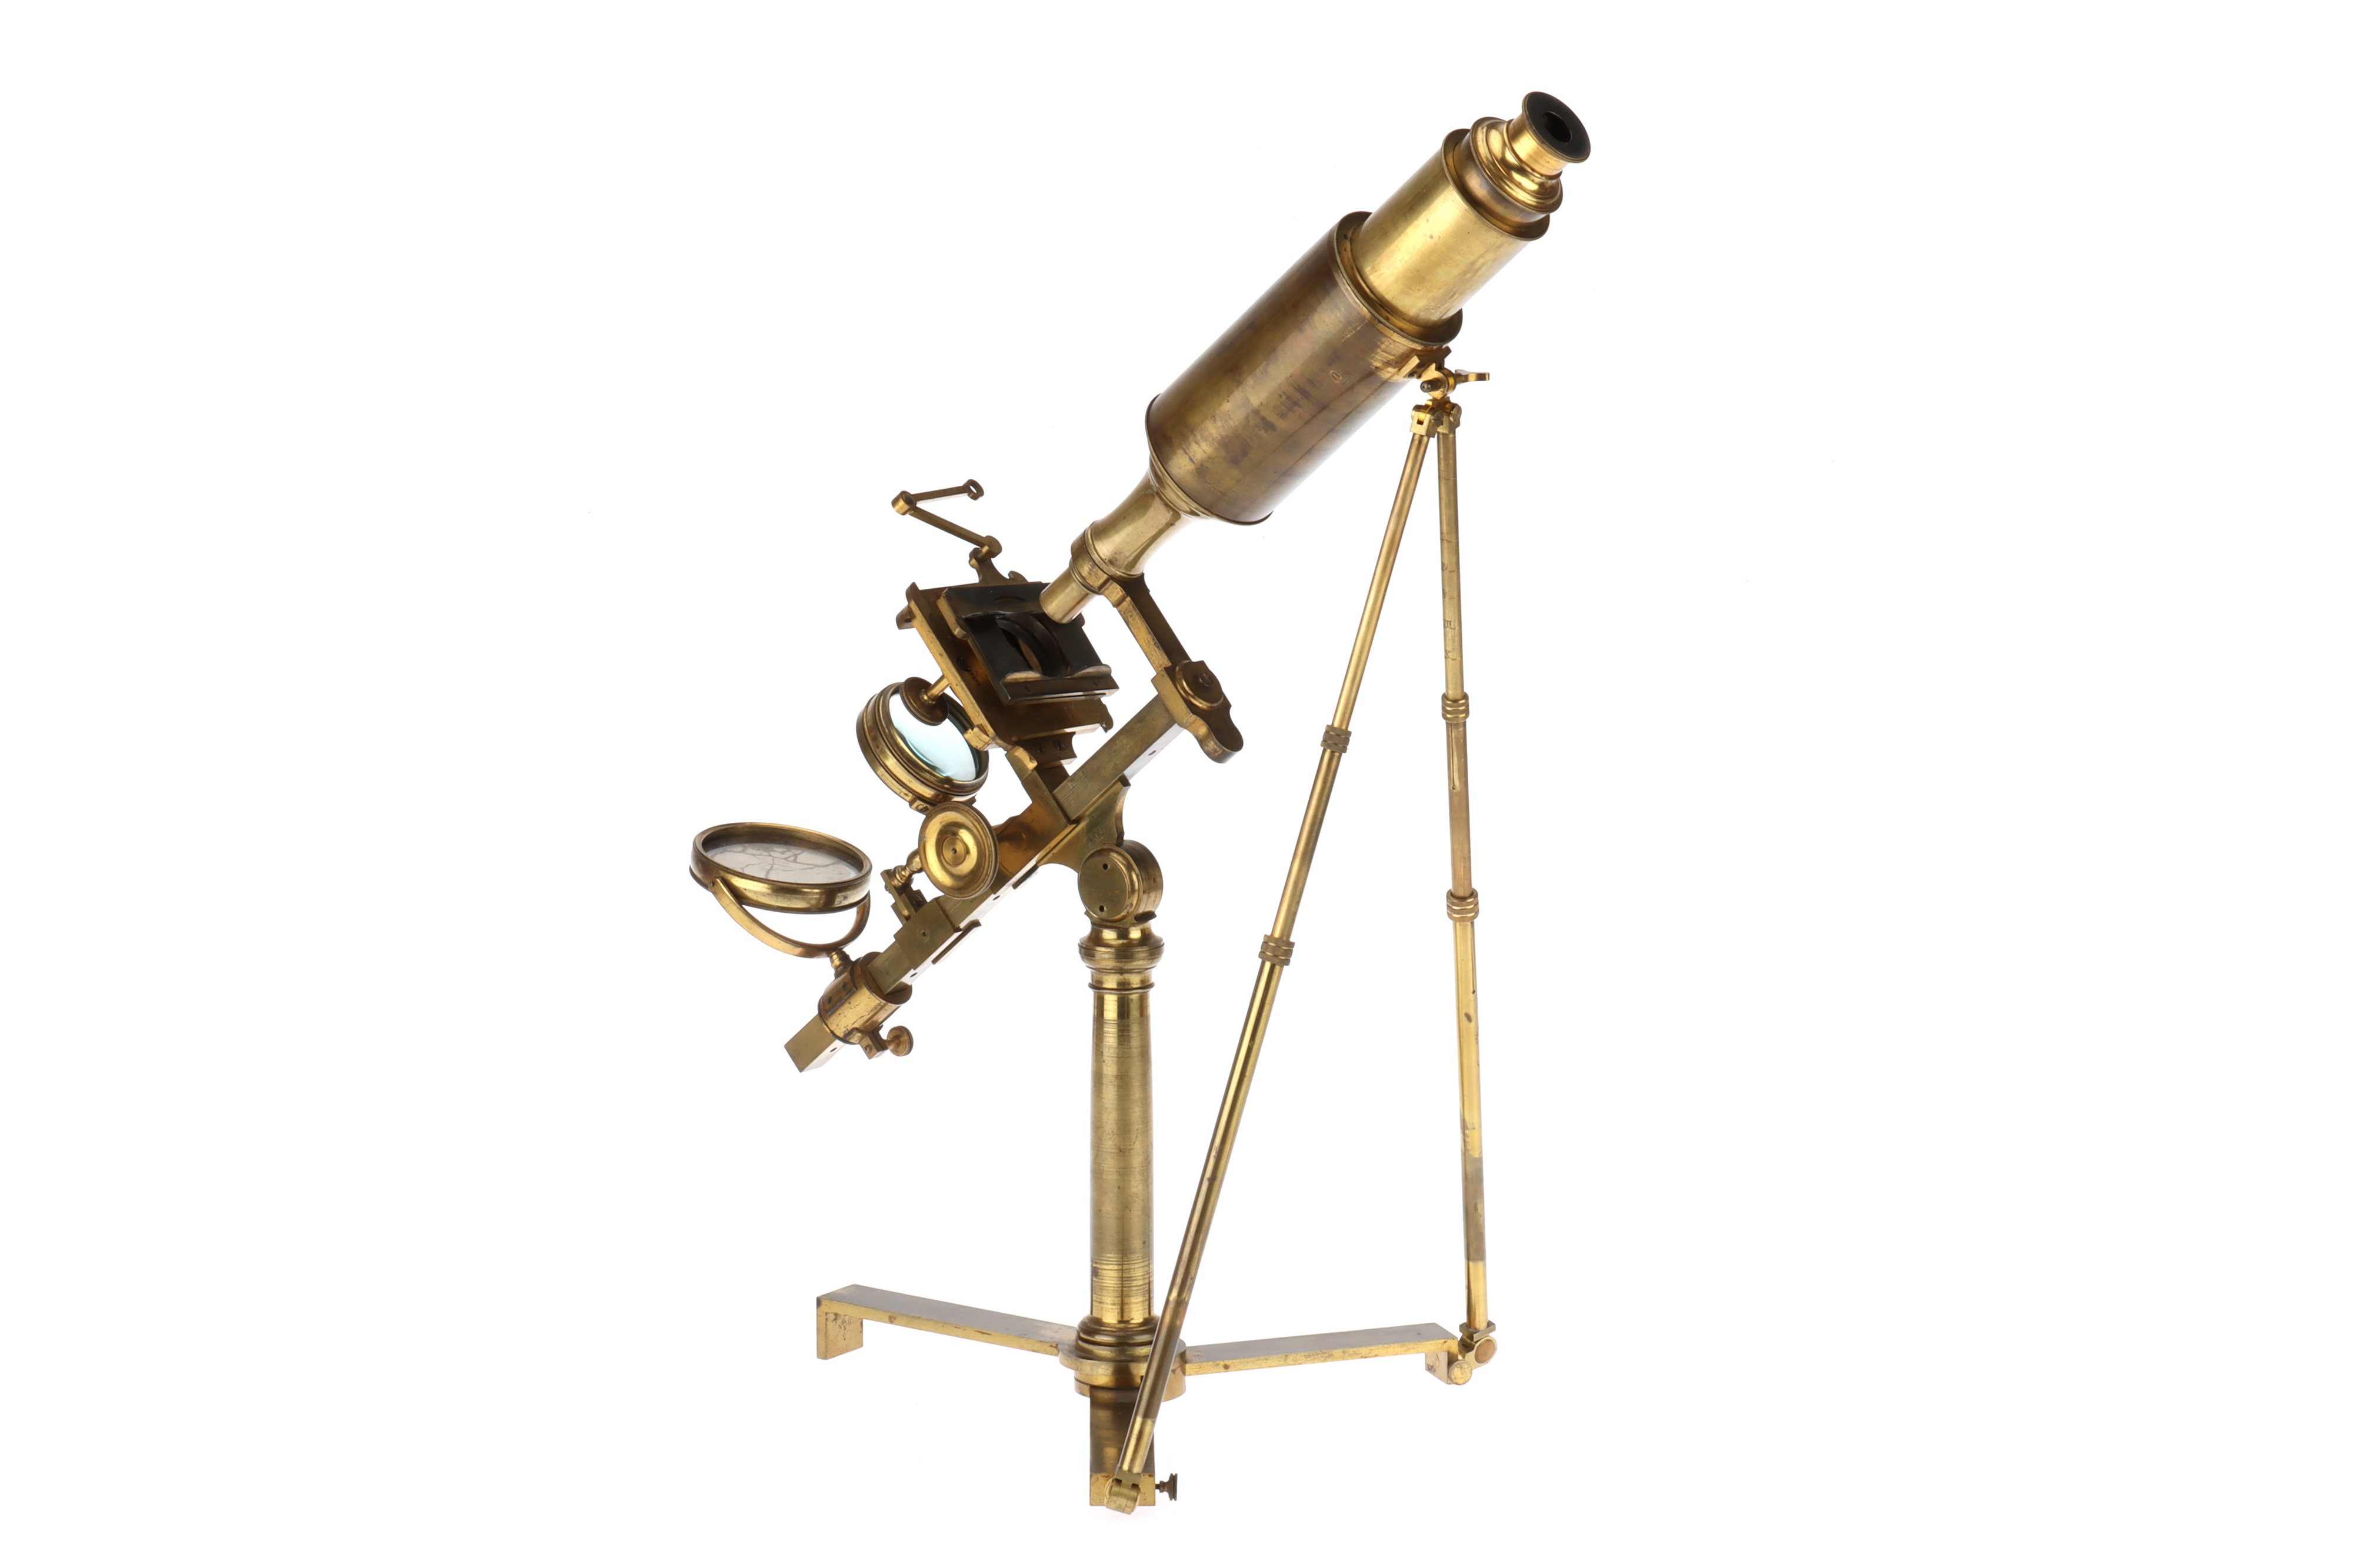 A Large & Very Early Achromatic Microscope Attributed to Tully, - Image 3 of 4